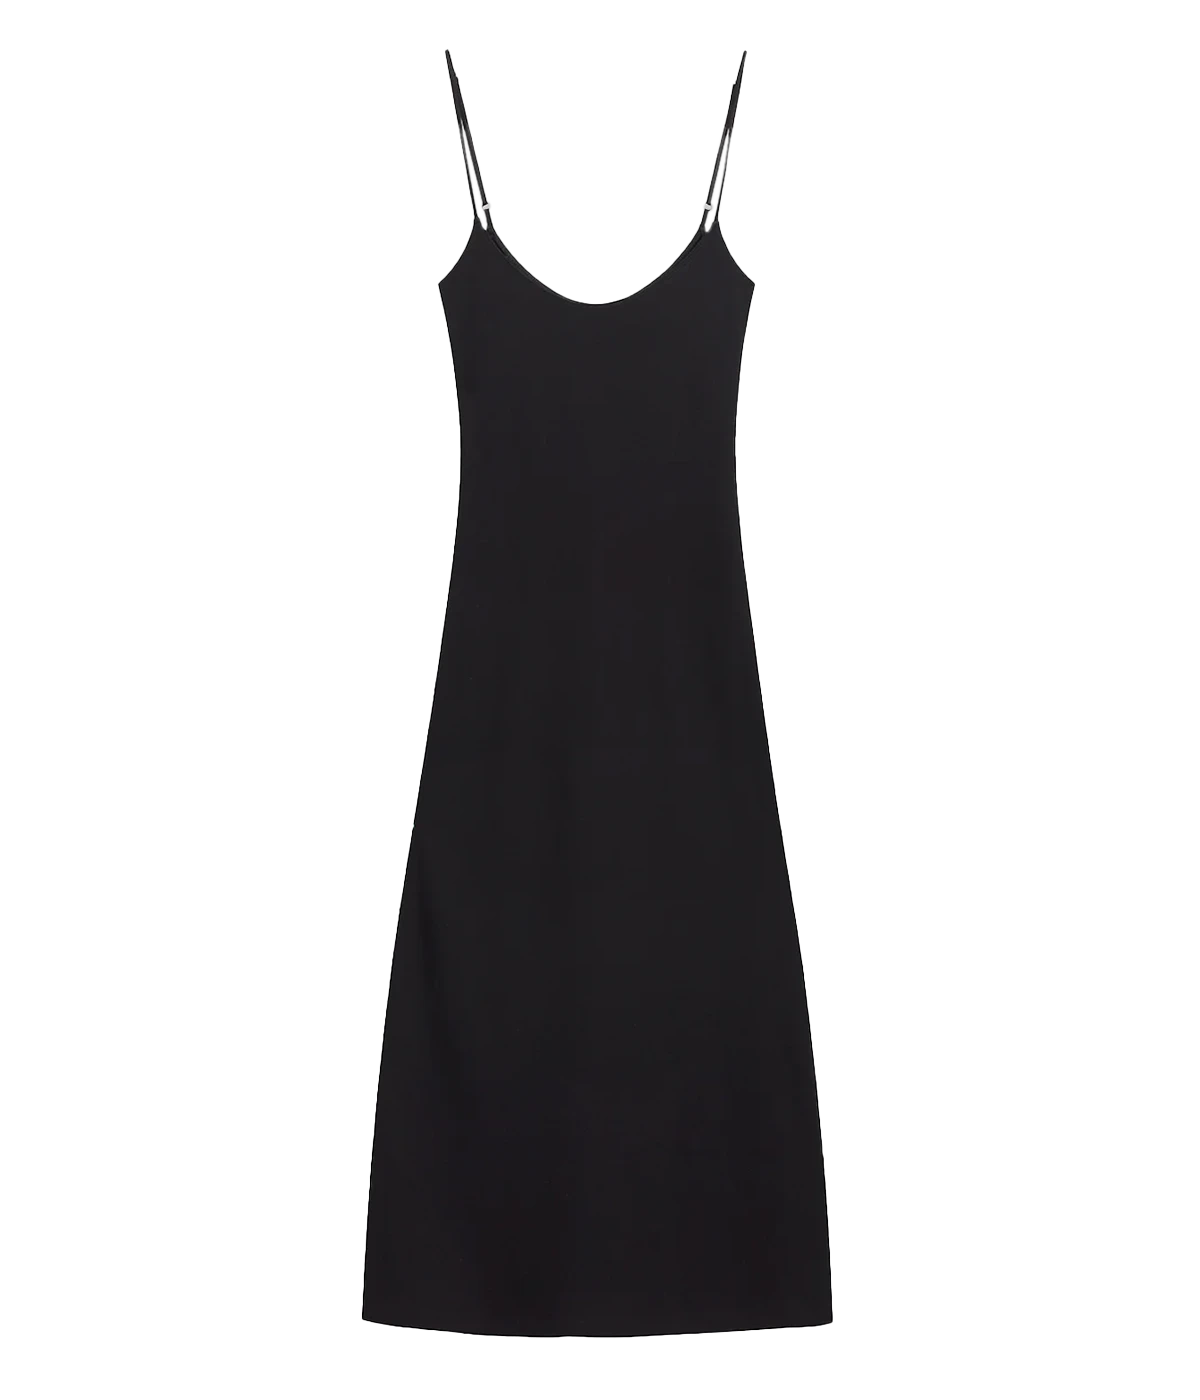 Skims inspired comfortable spaghetti strap maxi dress, timeless and elevated basic, bra friendly, comfortable, everyday, throw on and go, made internationally. 